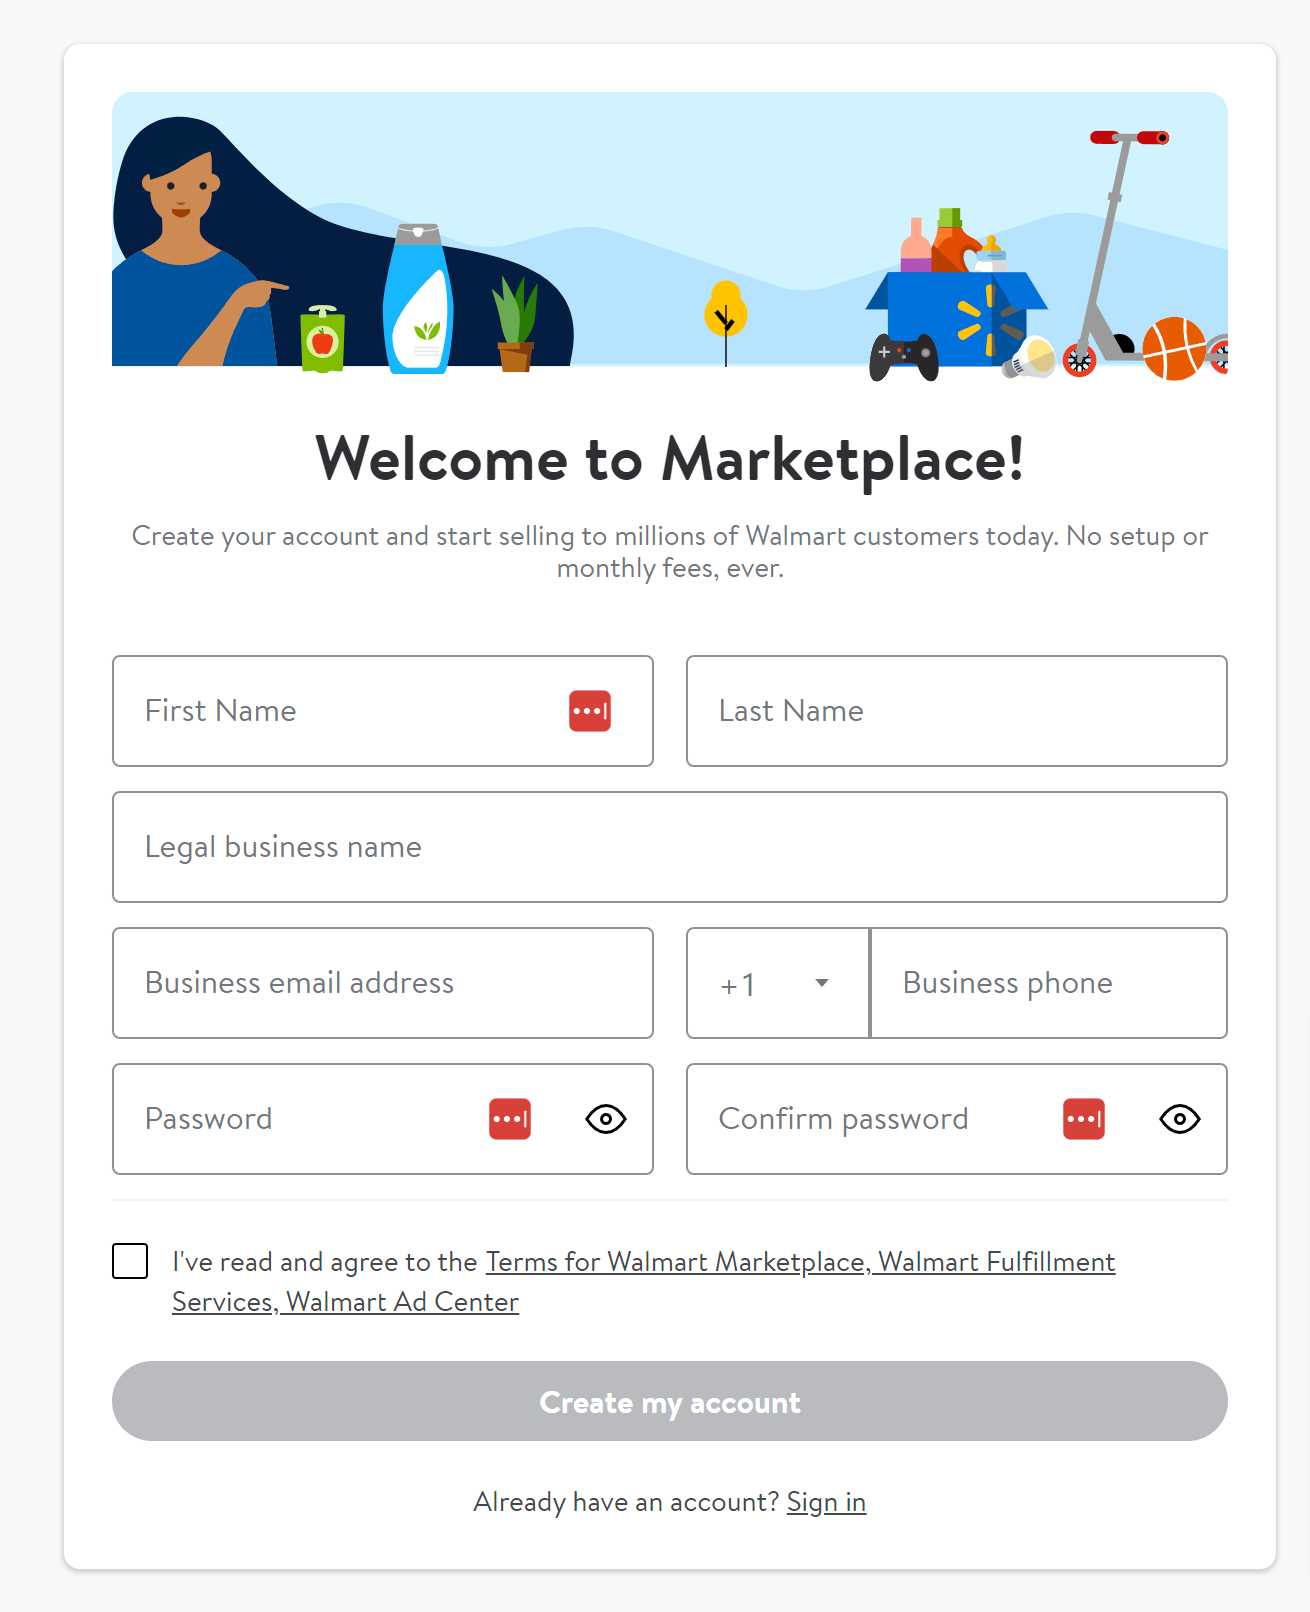 Welcome to Marketplace!